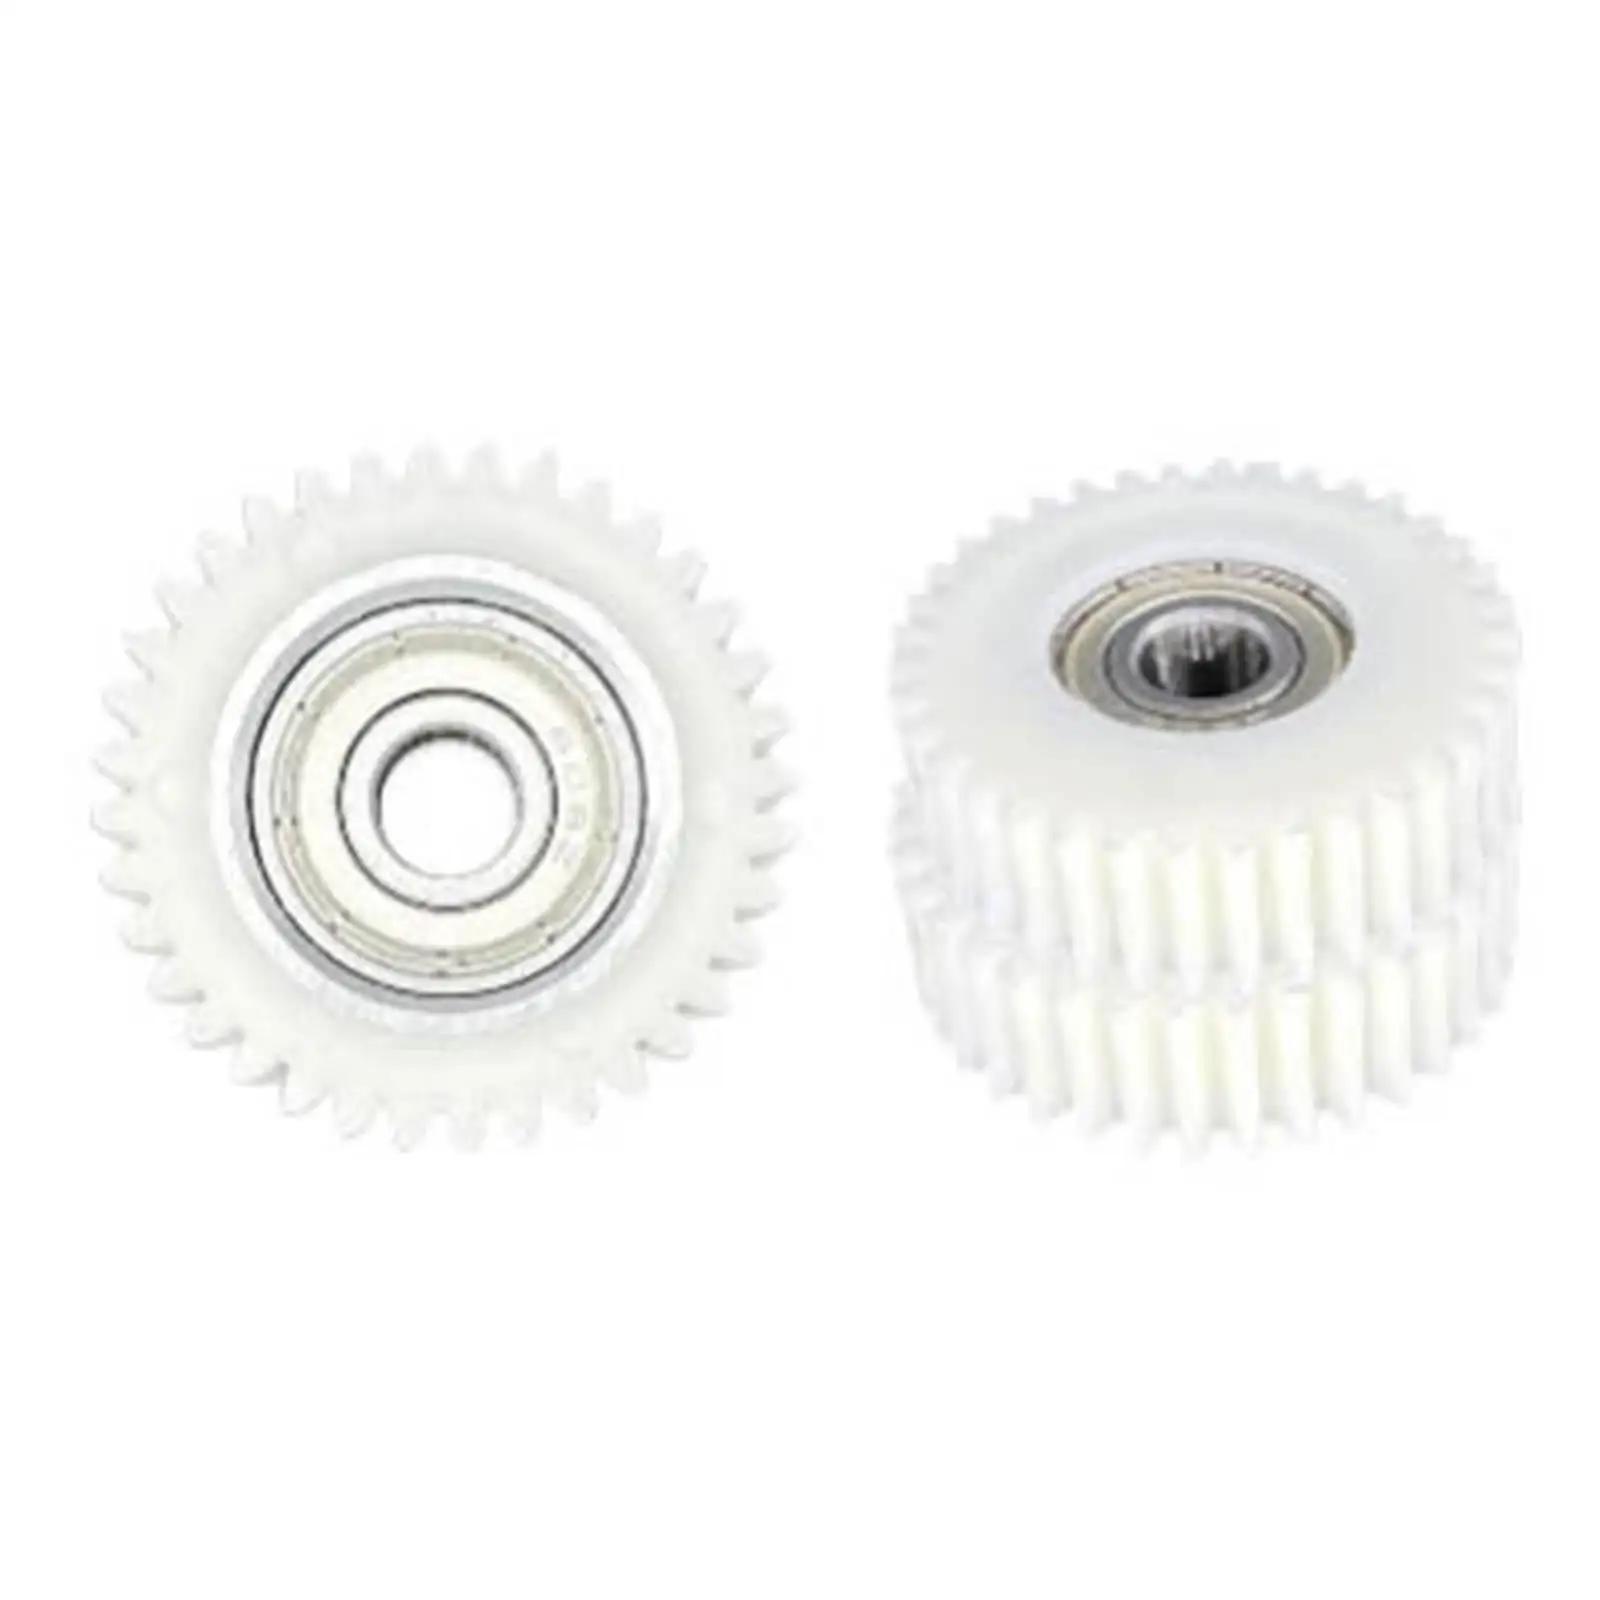 3x DurableNylon Electric Vehicle 36 Teeths Planetary Gears Set Part Replacement for Bicycle Bafang Motor Bearings Connector